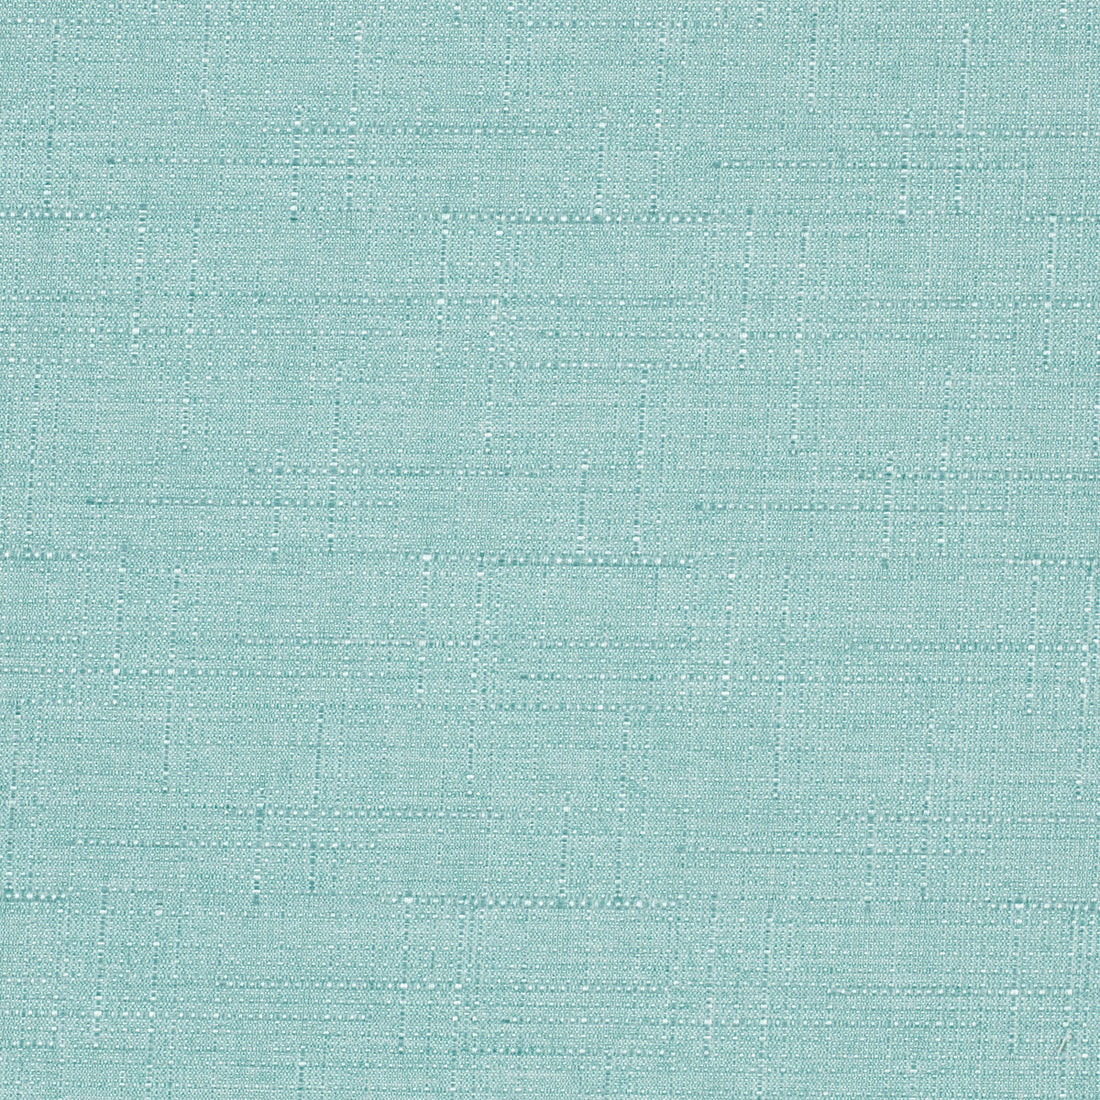 Kravet Contract fabric in 4317-15 color - pattern 4317.15.0 - by Kravet Contract